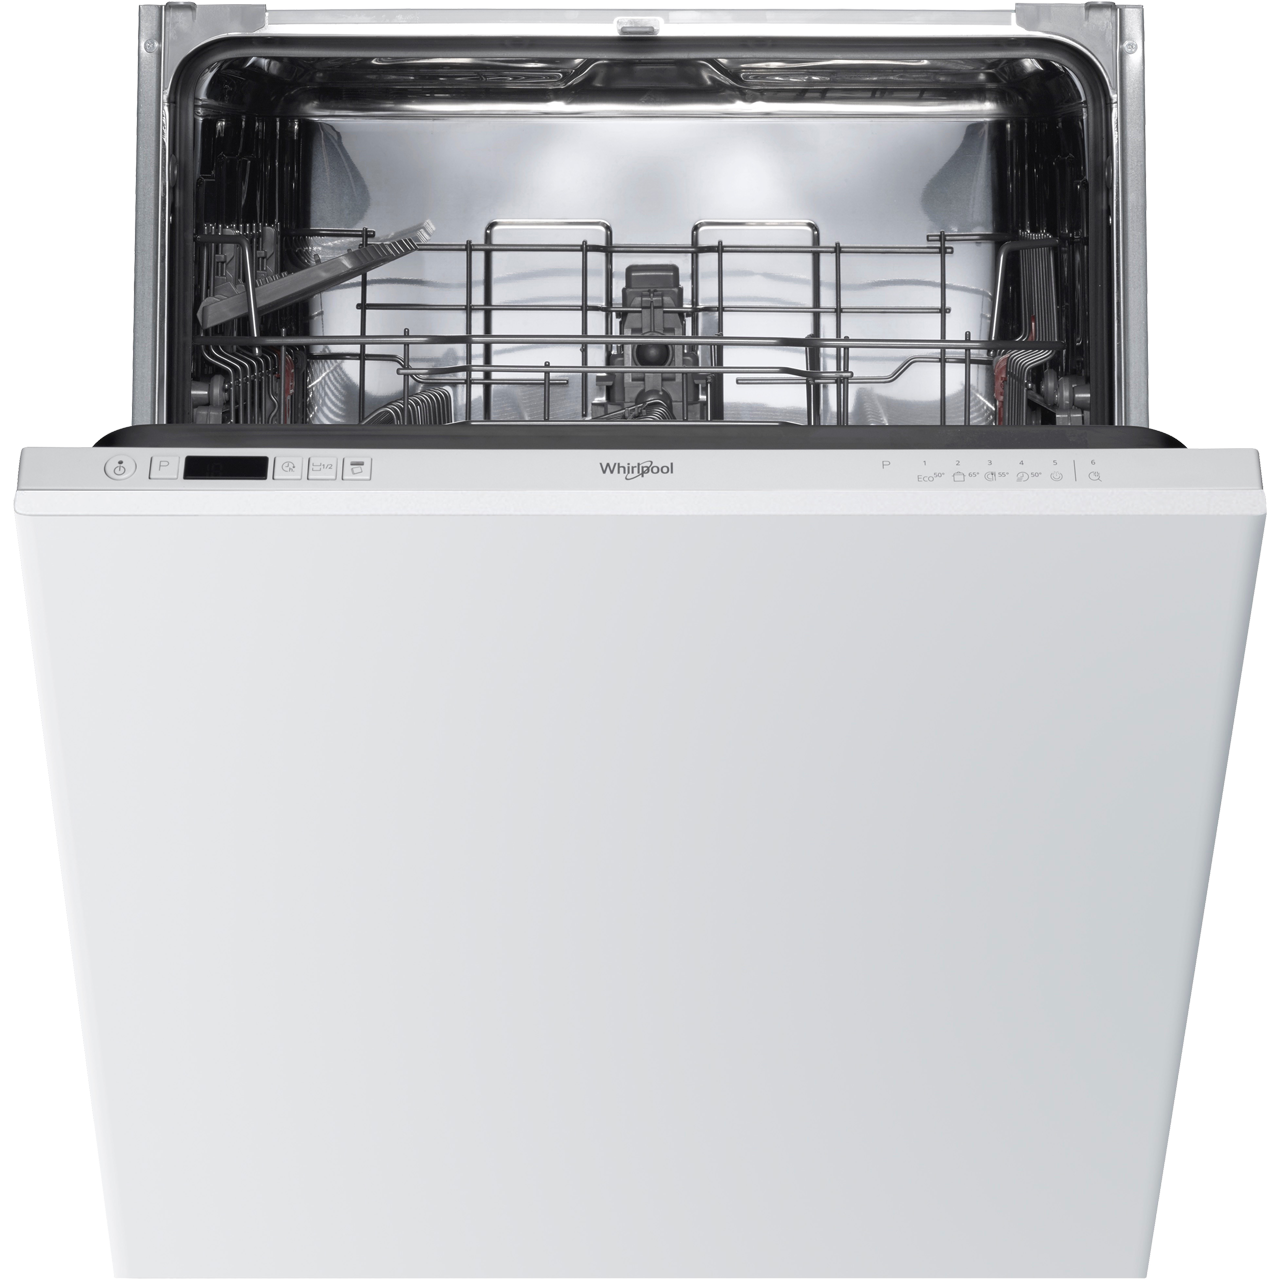 Whirlpool WIC3B19UK Fully Integrated Standard Dishwasher Review